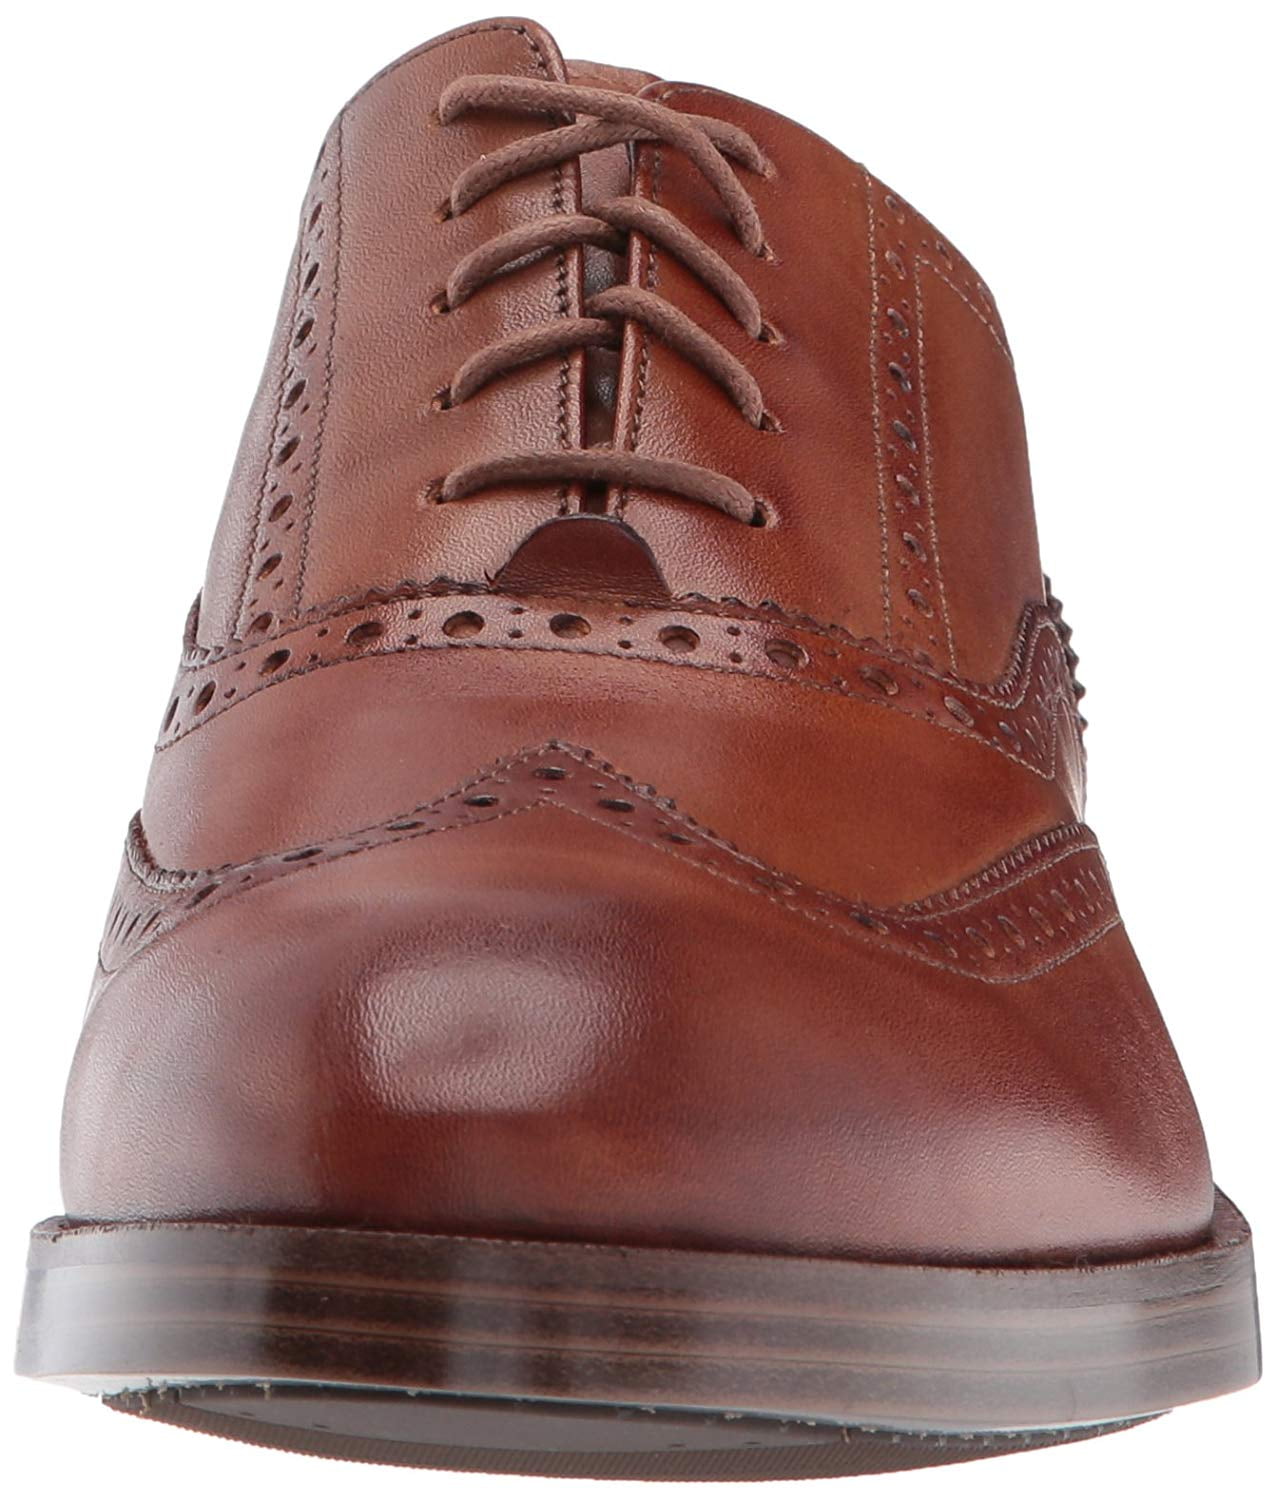 cole haan men's henry grand shortwing oxford